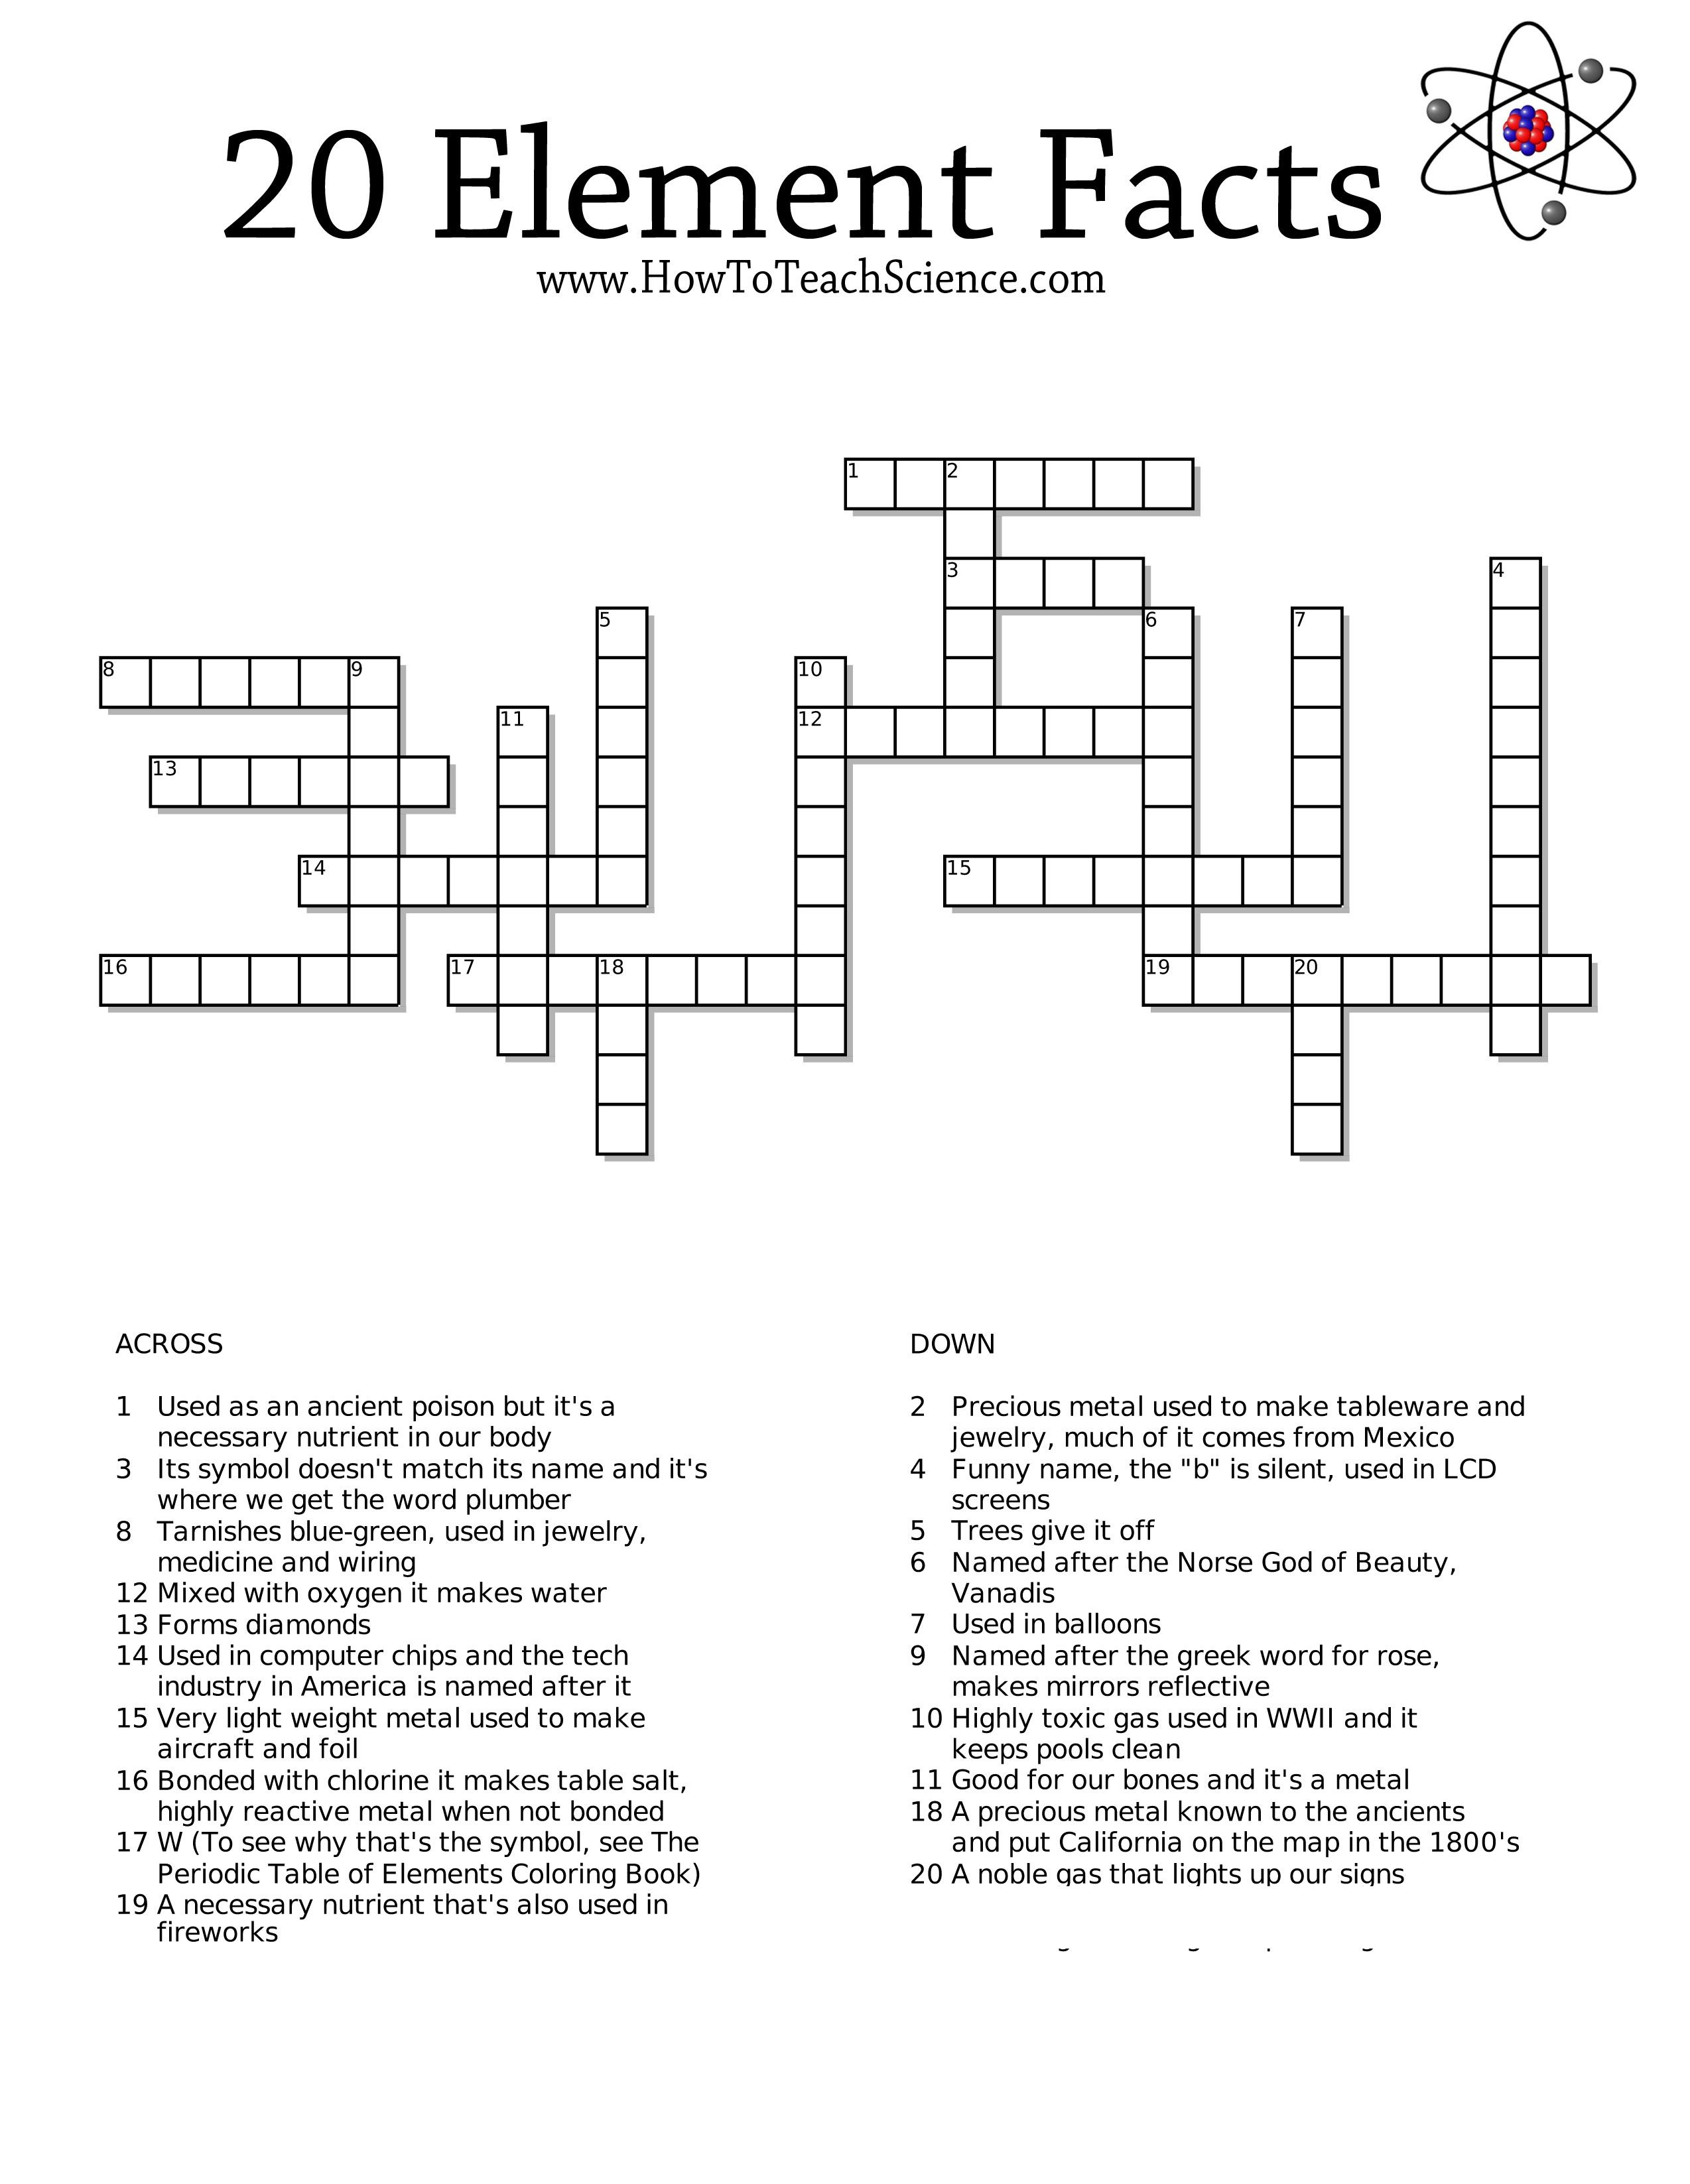 Free Crossword Printables On The Elements For 3Rd Grade Through High - Printable Crossword For Grade 6